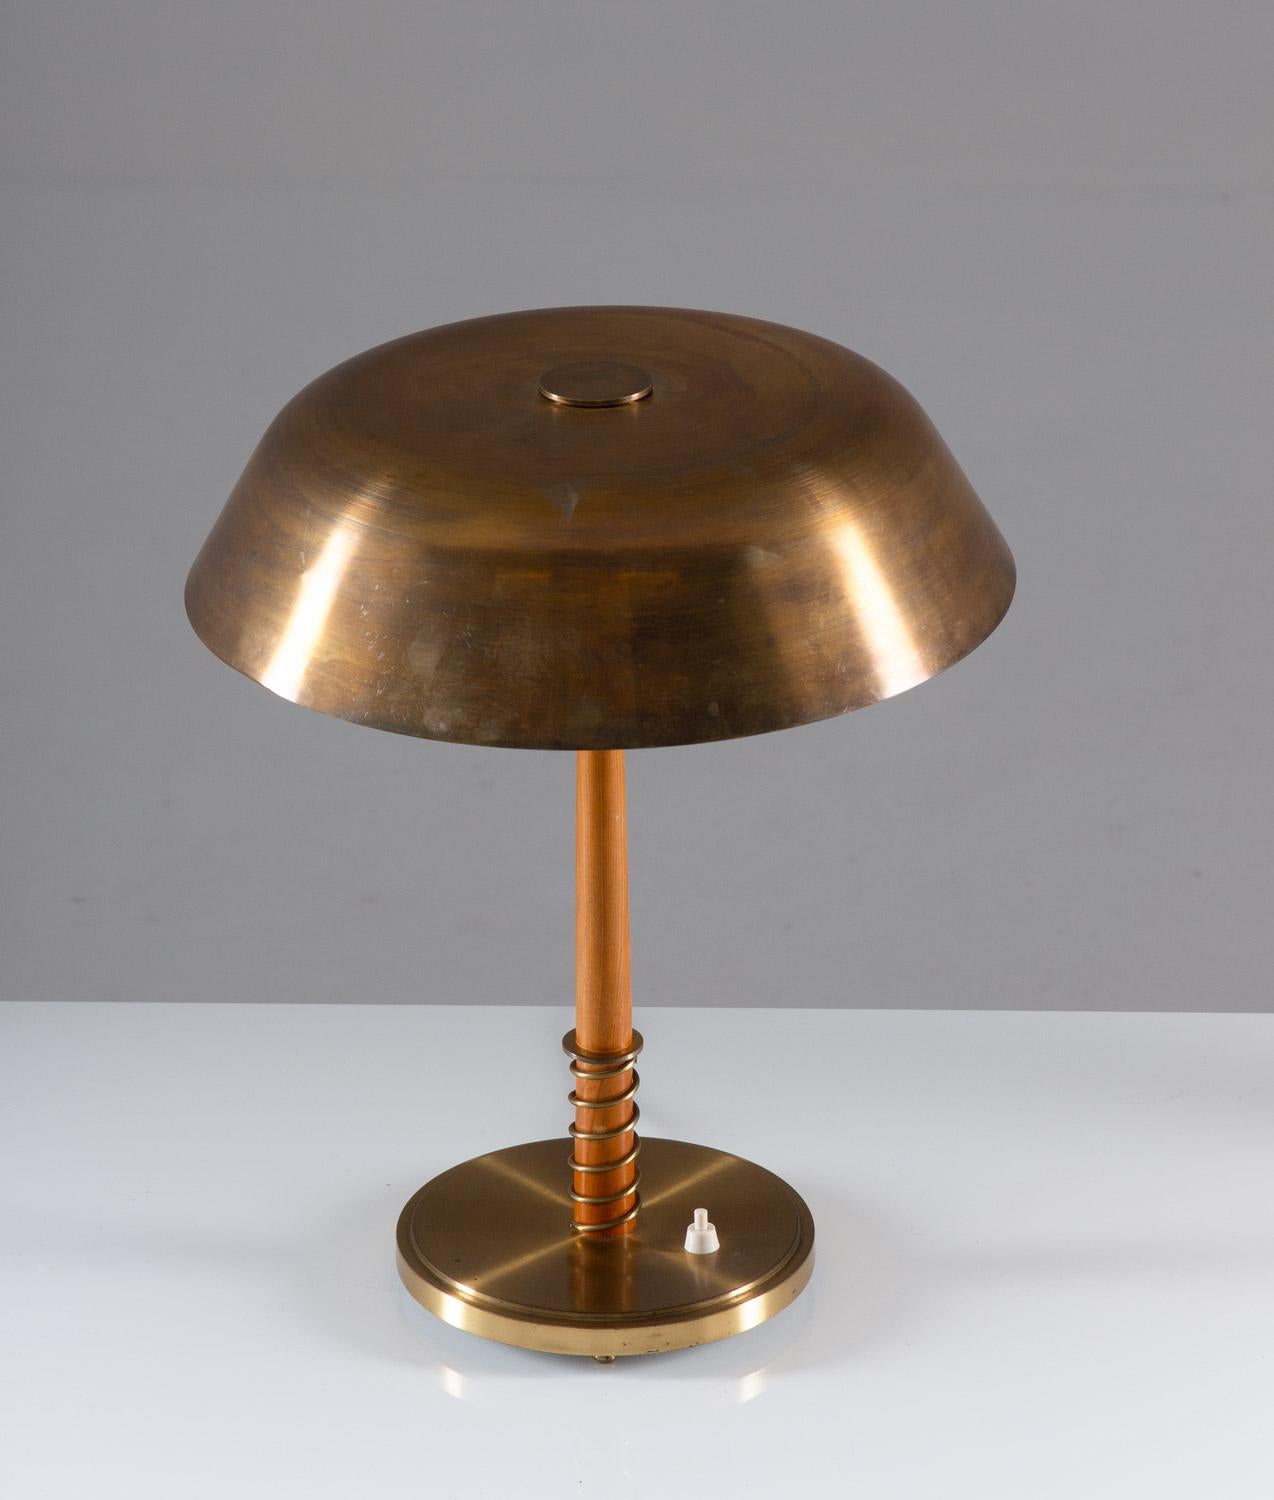 Rare table lamp in brass and wood by Harald Notini for Böhlmarks, Sweden.
This elegant lamp was manufactured during the Swedish Modern era and is of very high quality.
Condition: Very good condition with nice patina. One minimal dent on the shade,